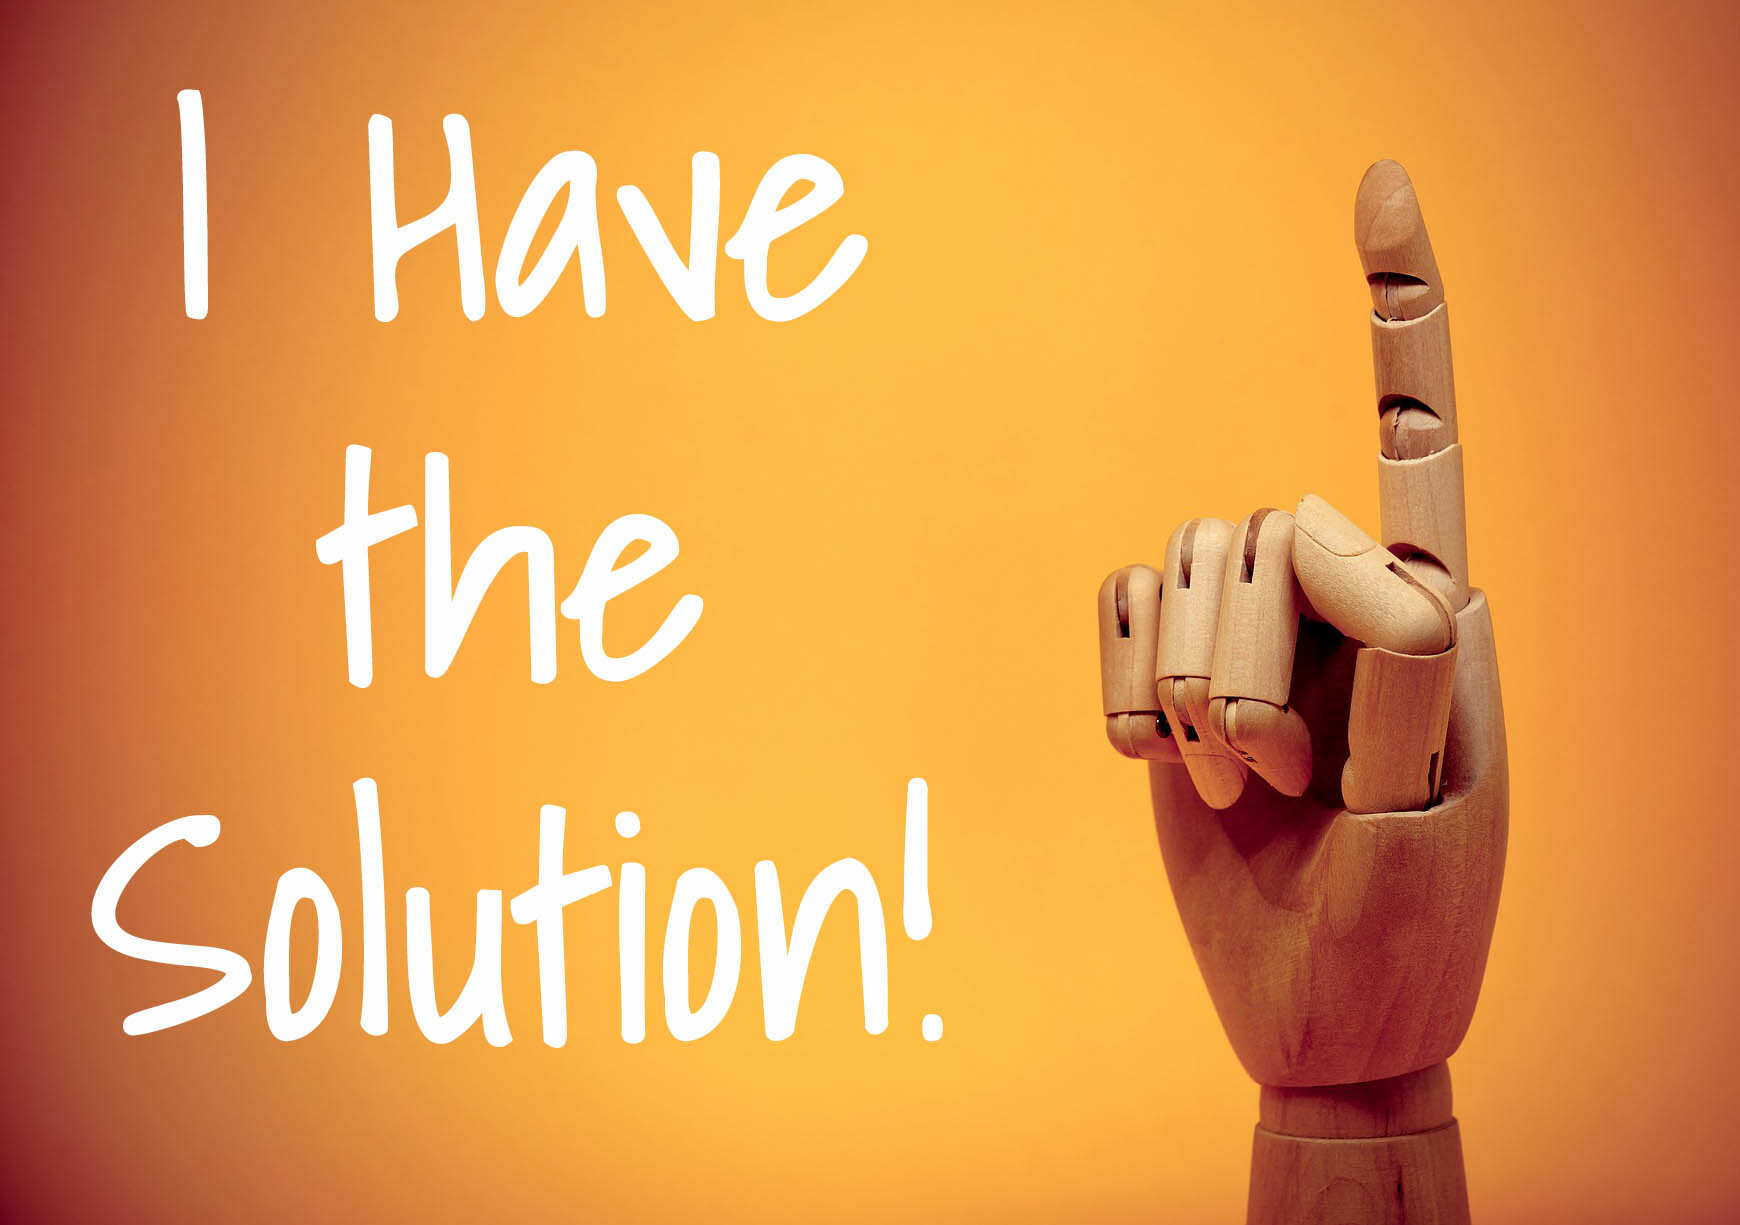 picture of wooden hand holding up index finger and words "I have the solution"